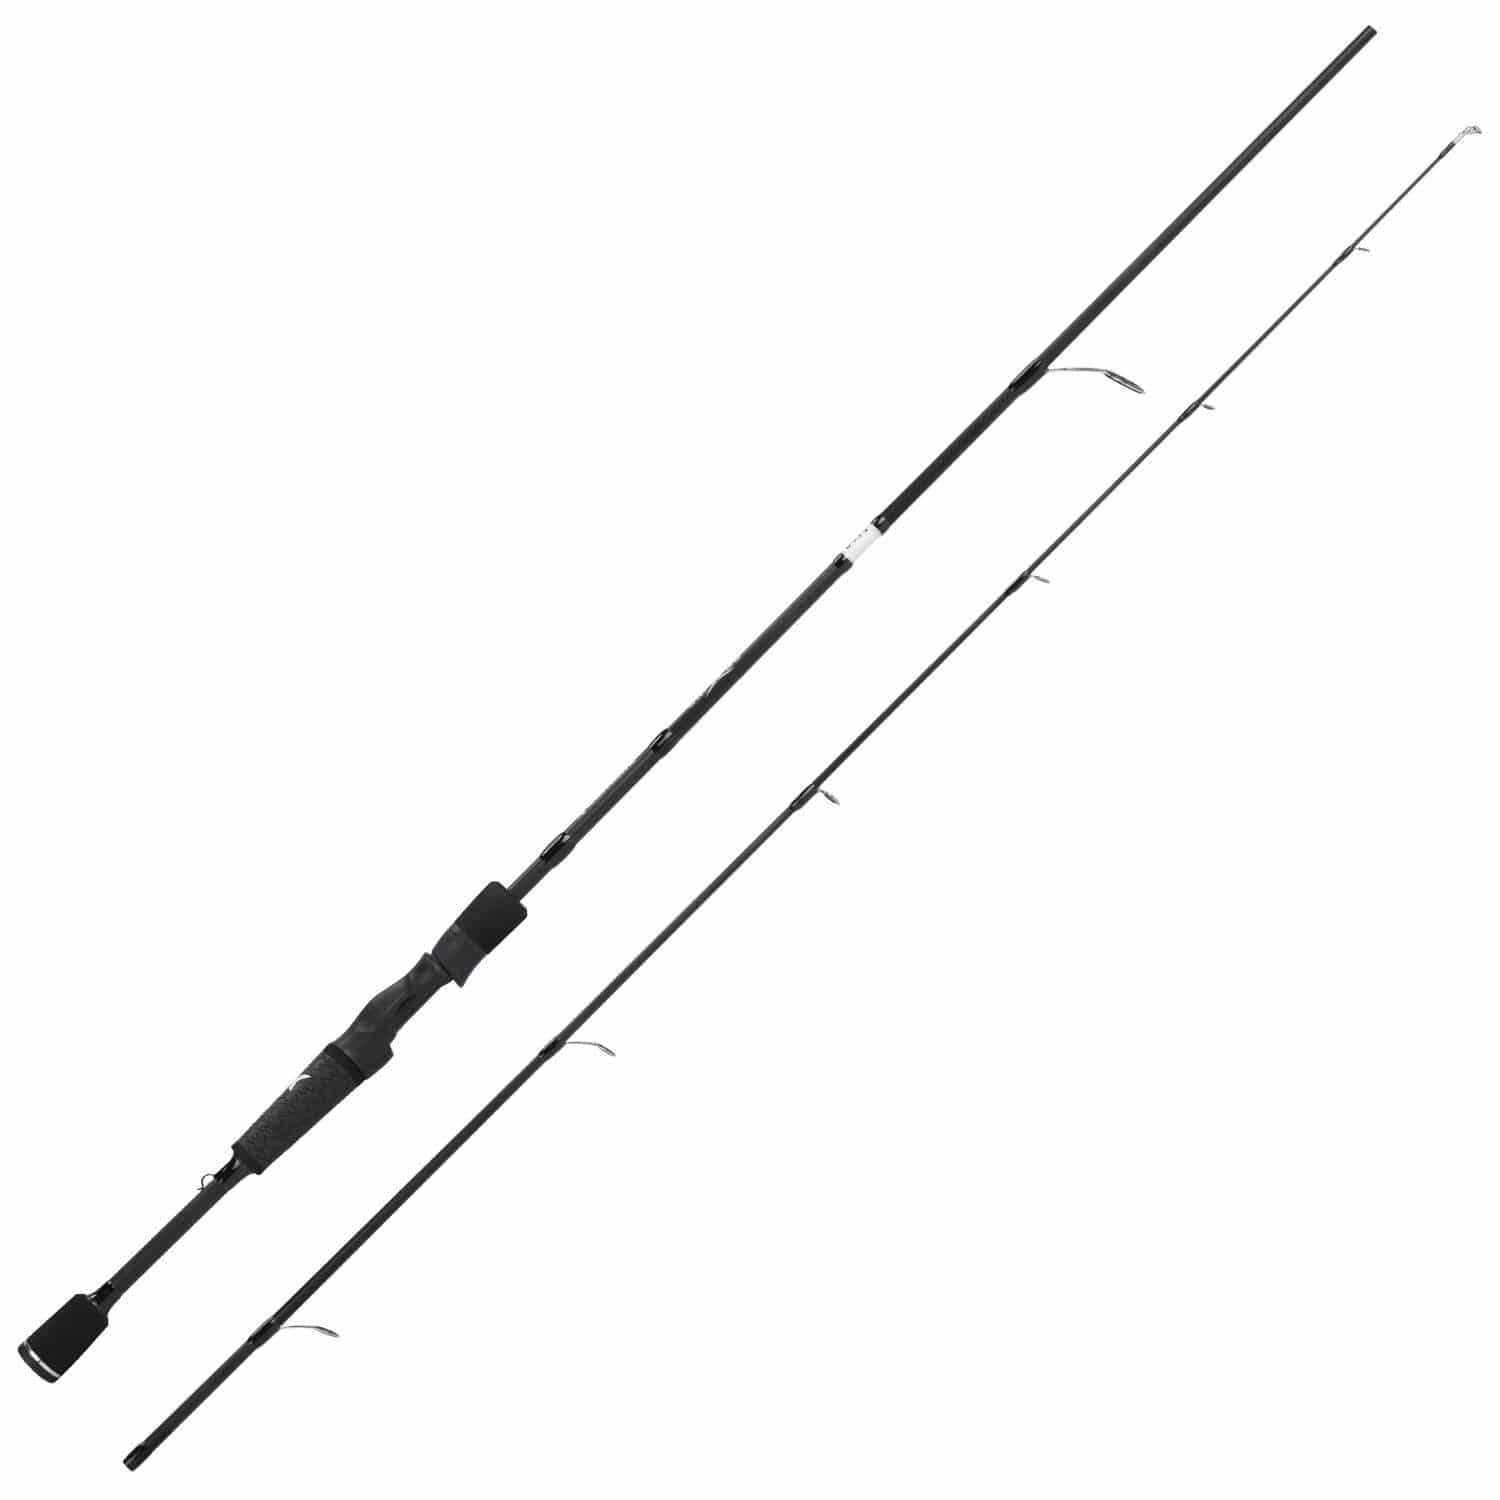 KastKing Crixus Spinning Rod and Reel Combo by Sportsman's Warehouse